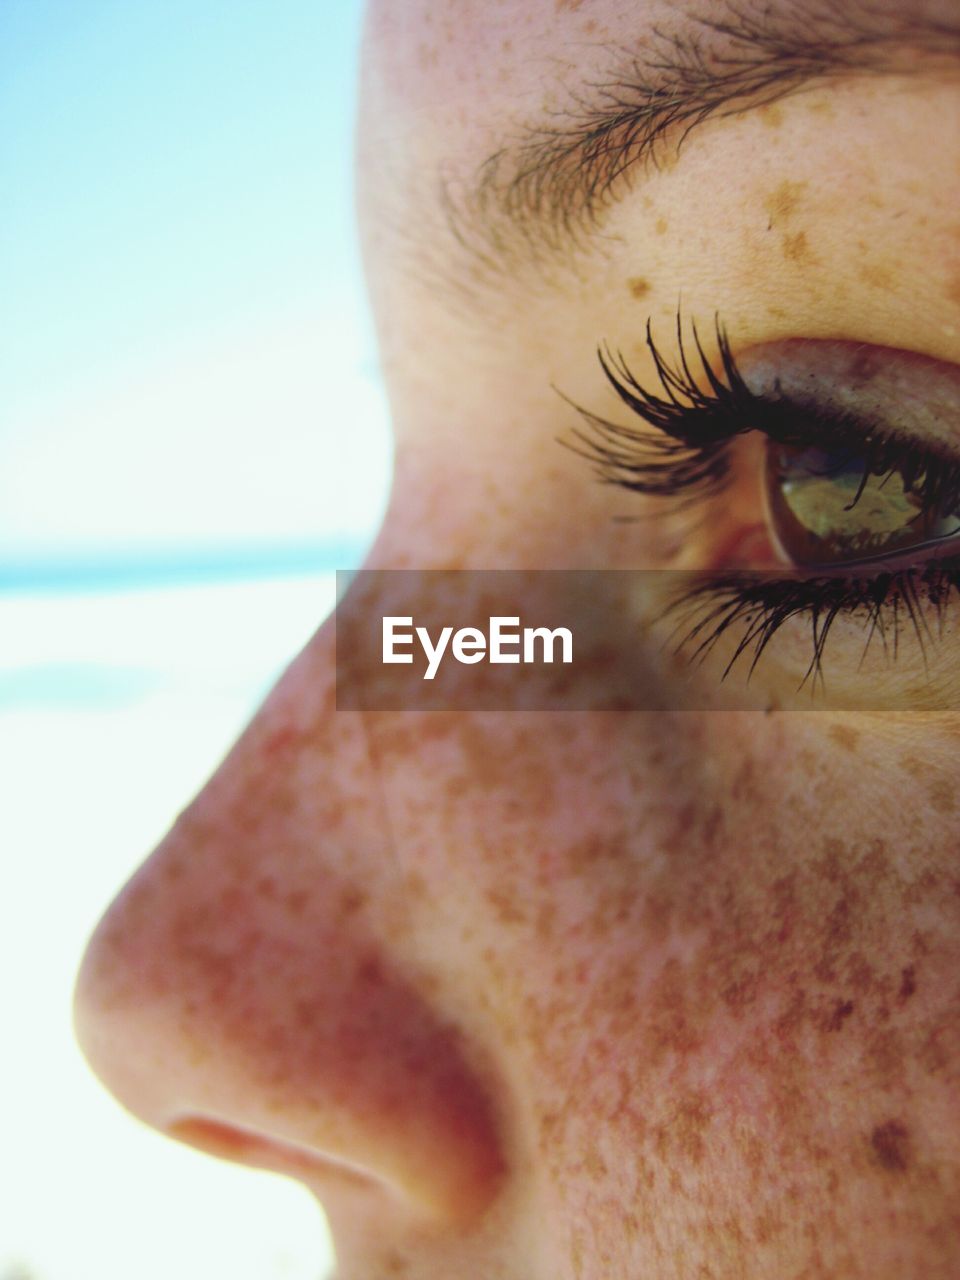 Cropped image of person with freckles